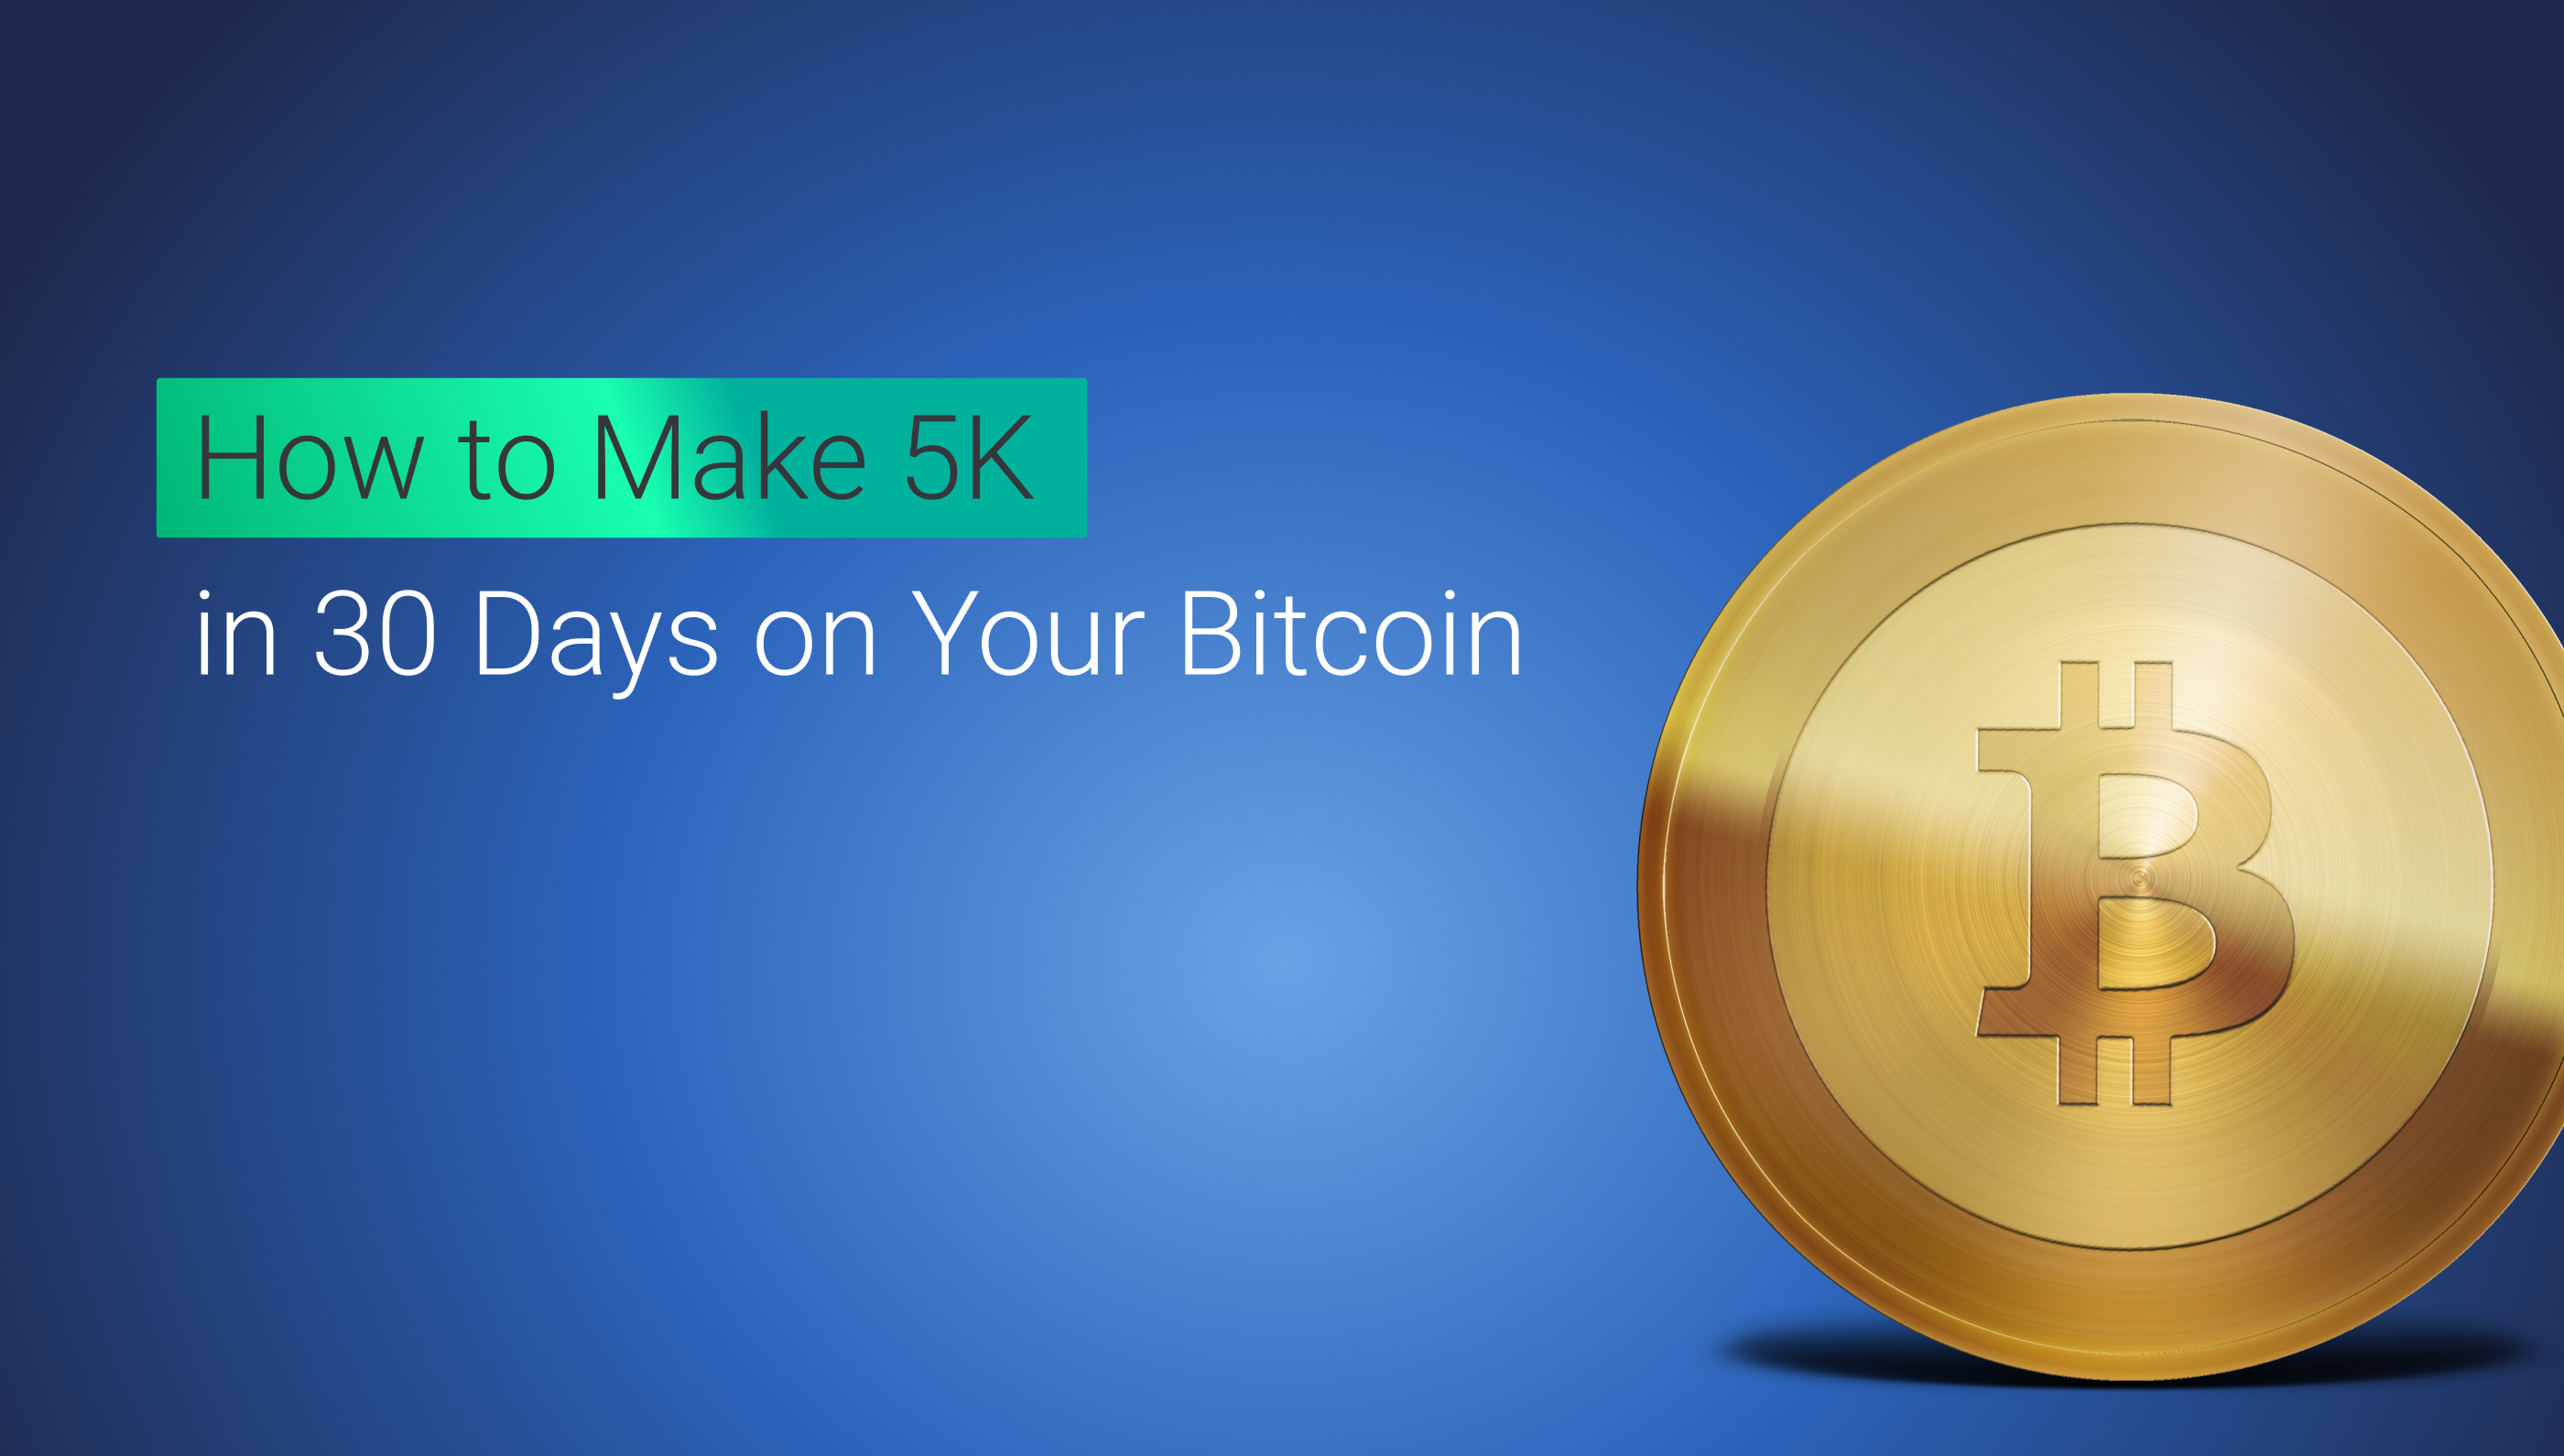 How to Make 5K in 30 Days on Your Bitcoin